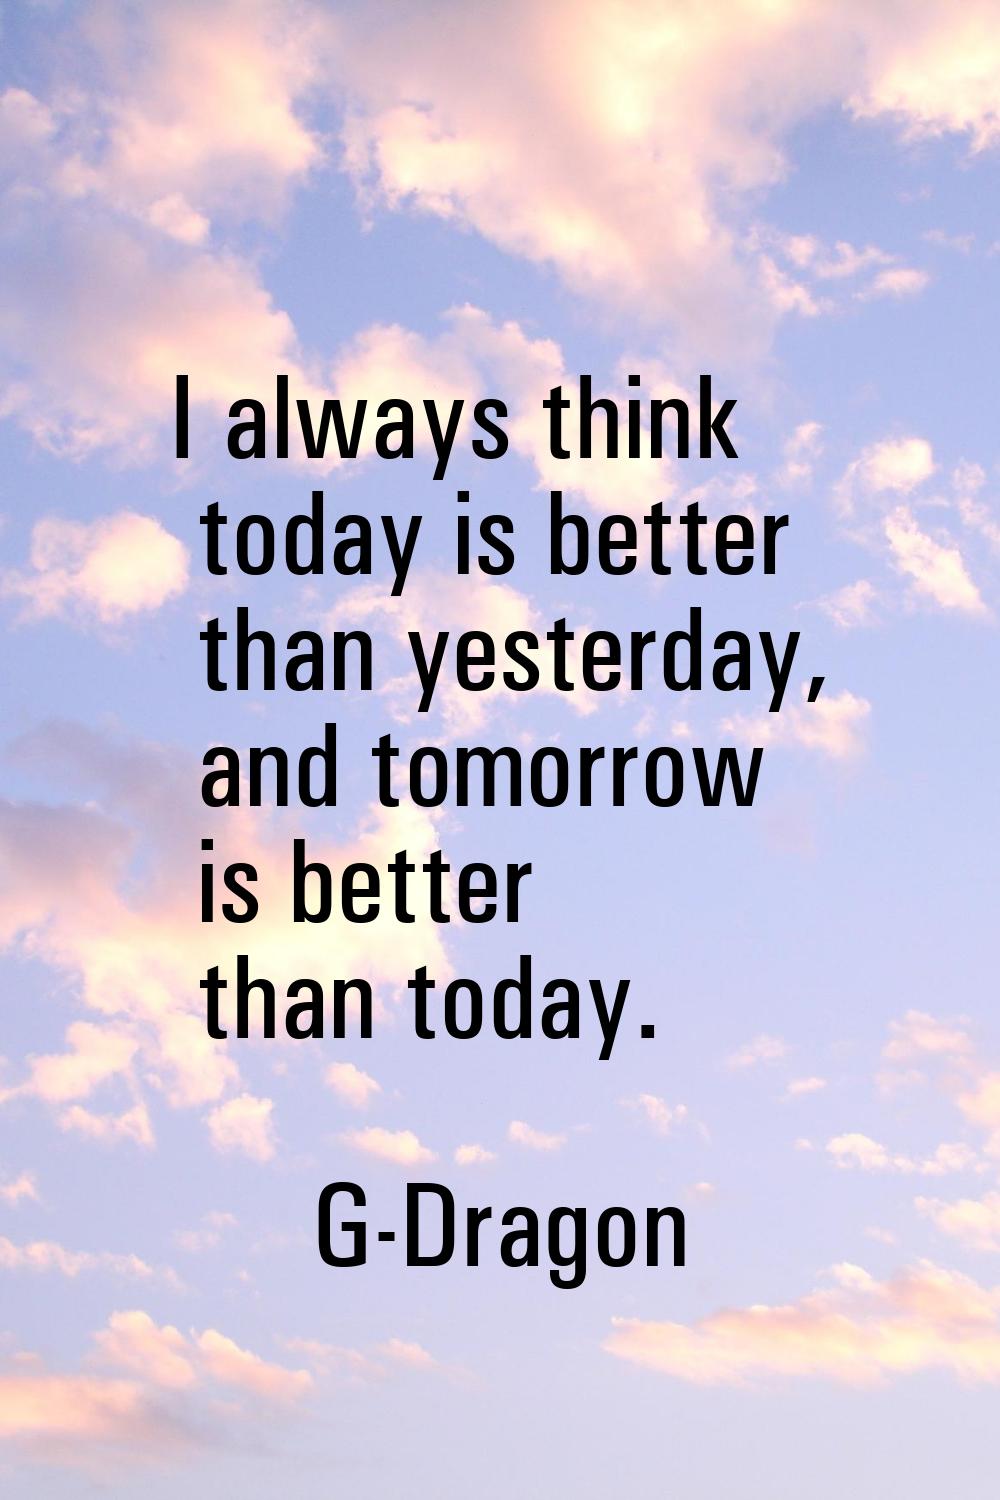 I always think today is better than yesterday, and tomorrow is better than today.